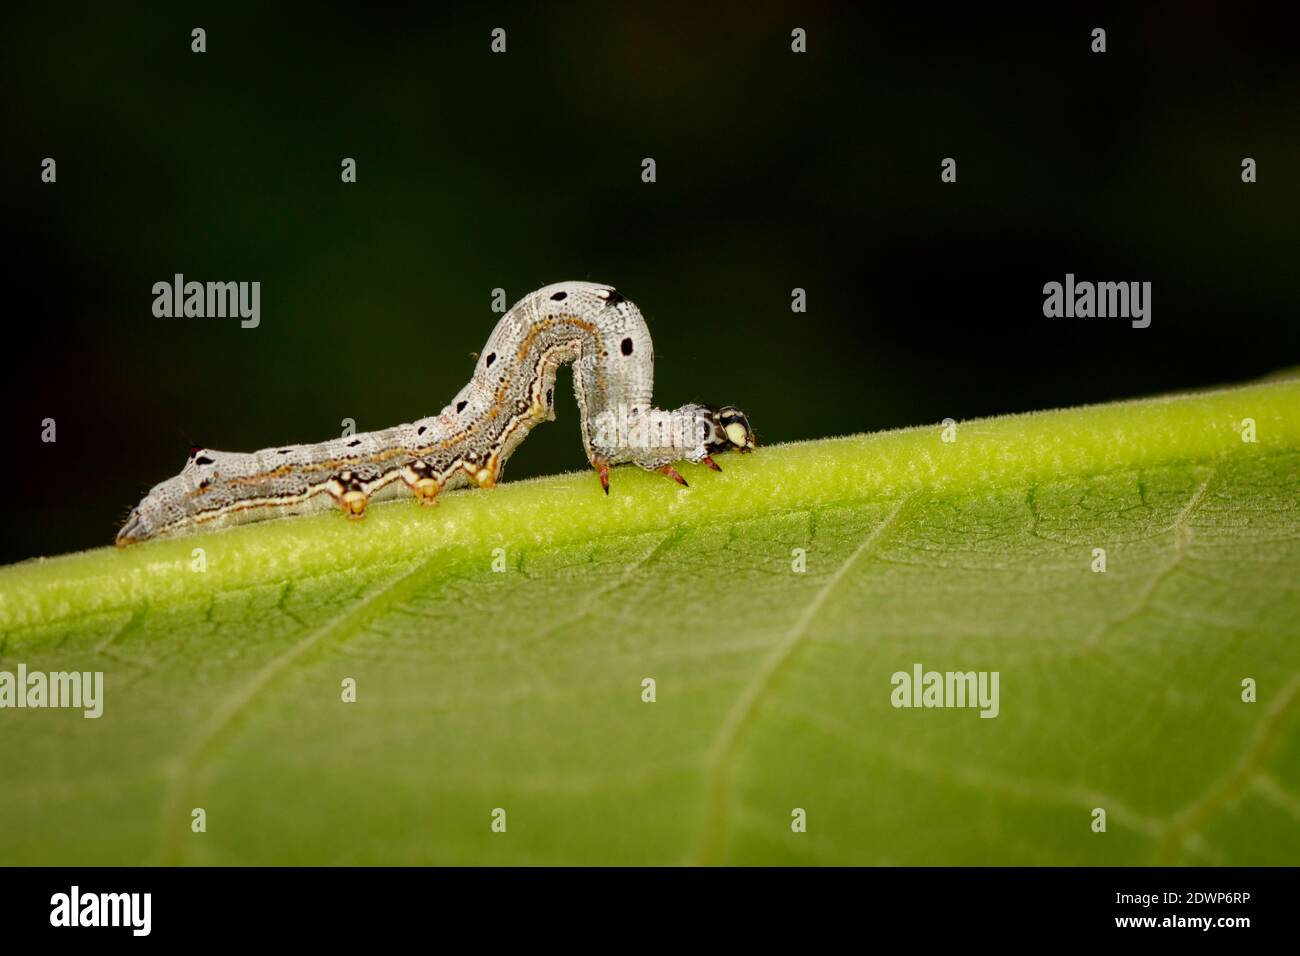 Image of Worms (caterpillars) on green leaf. Insect. Animal. Stock Photo